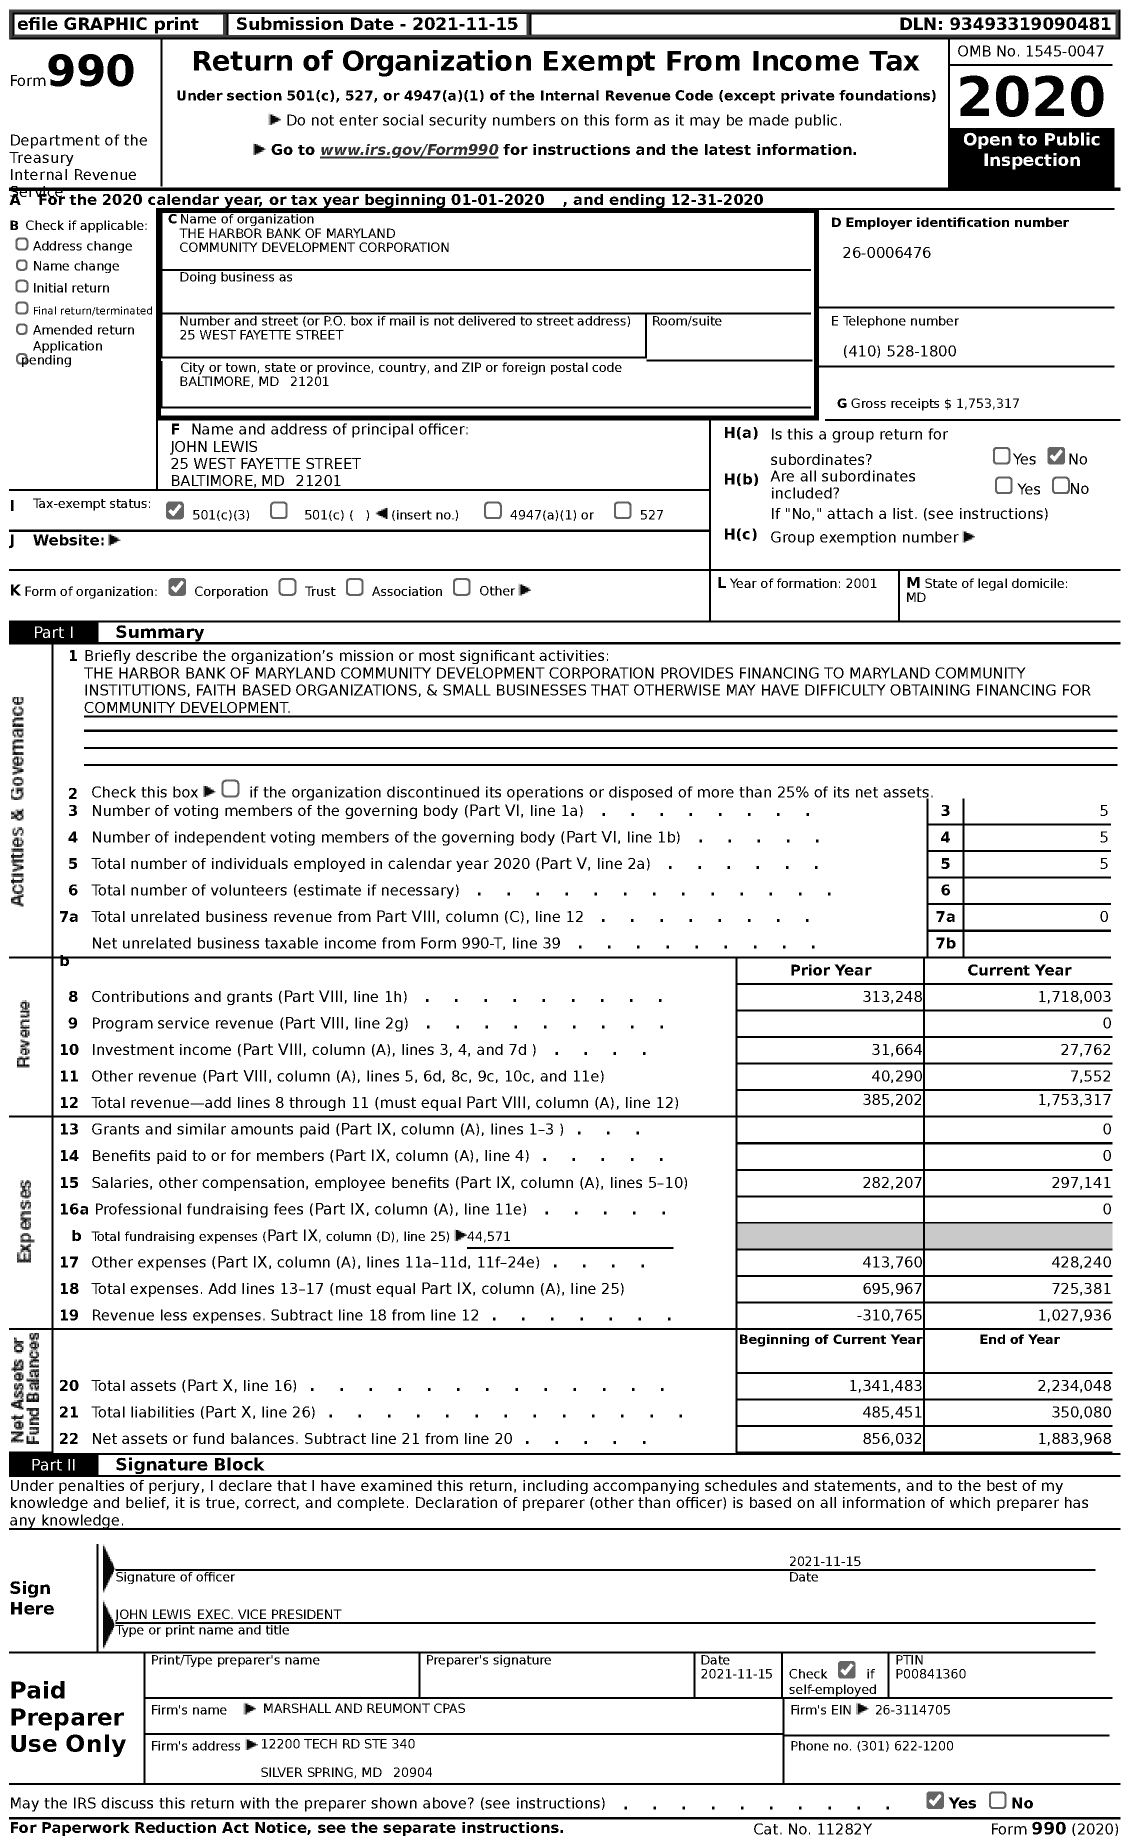 Image of first page of 2020 Form 990 for The Harbor Bank of Maryland Community Development Corporation